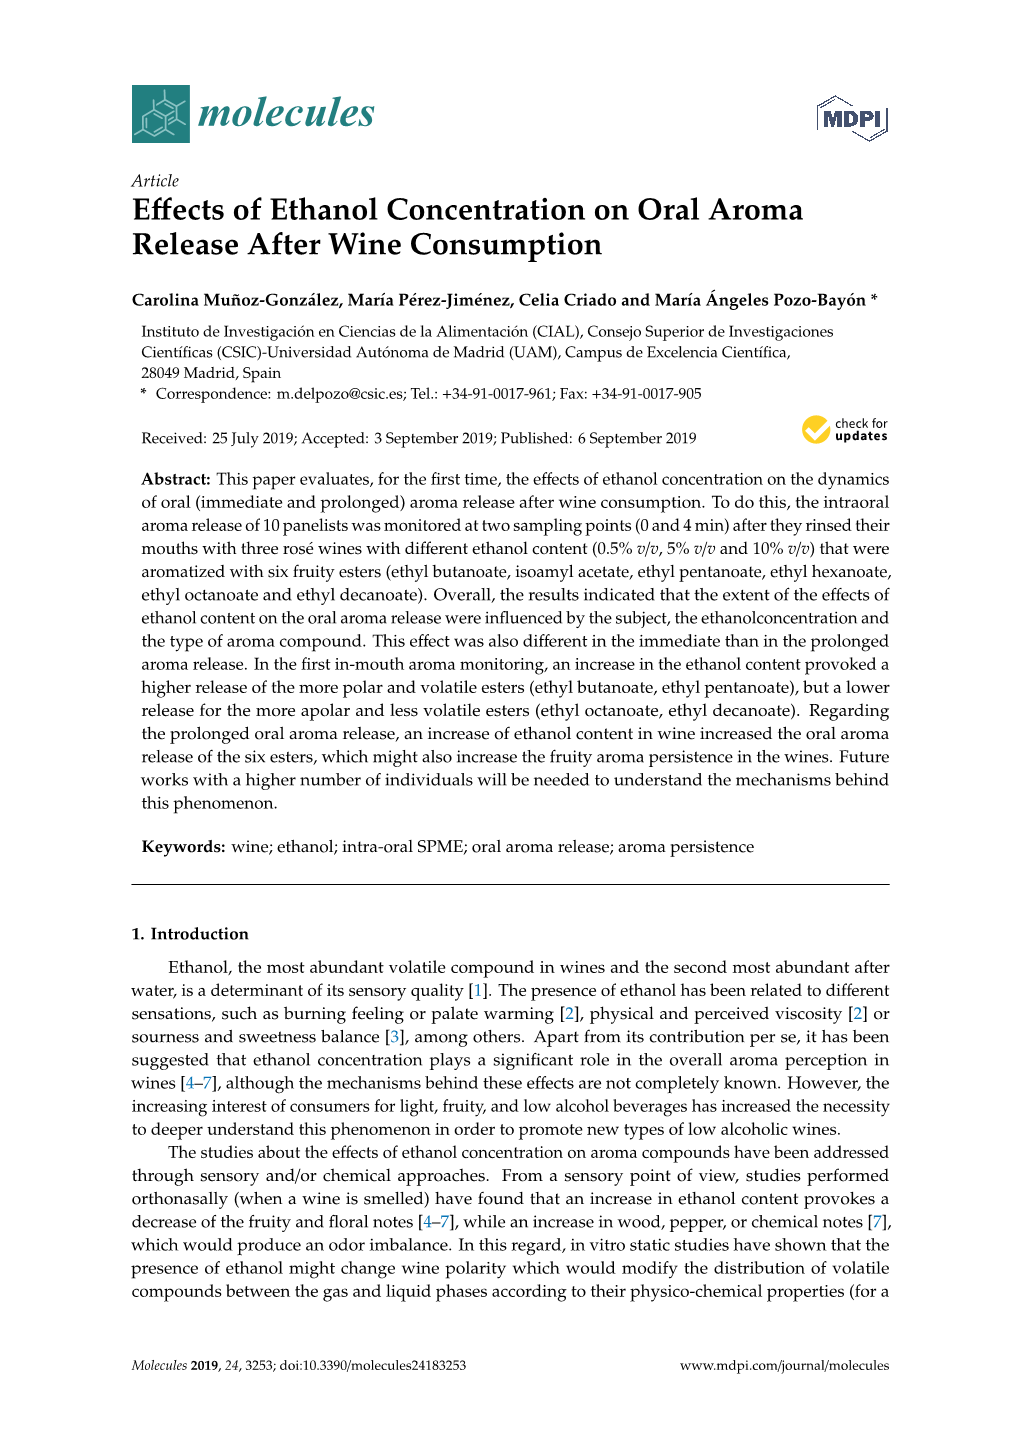 Effects of Ethanol Concentration on Oral Aroma Release After Wine Consumption